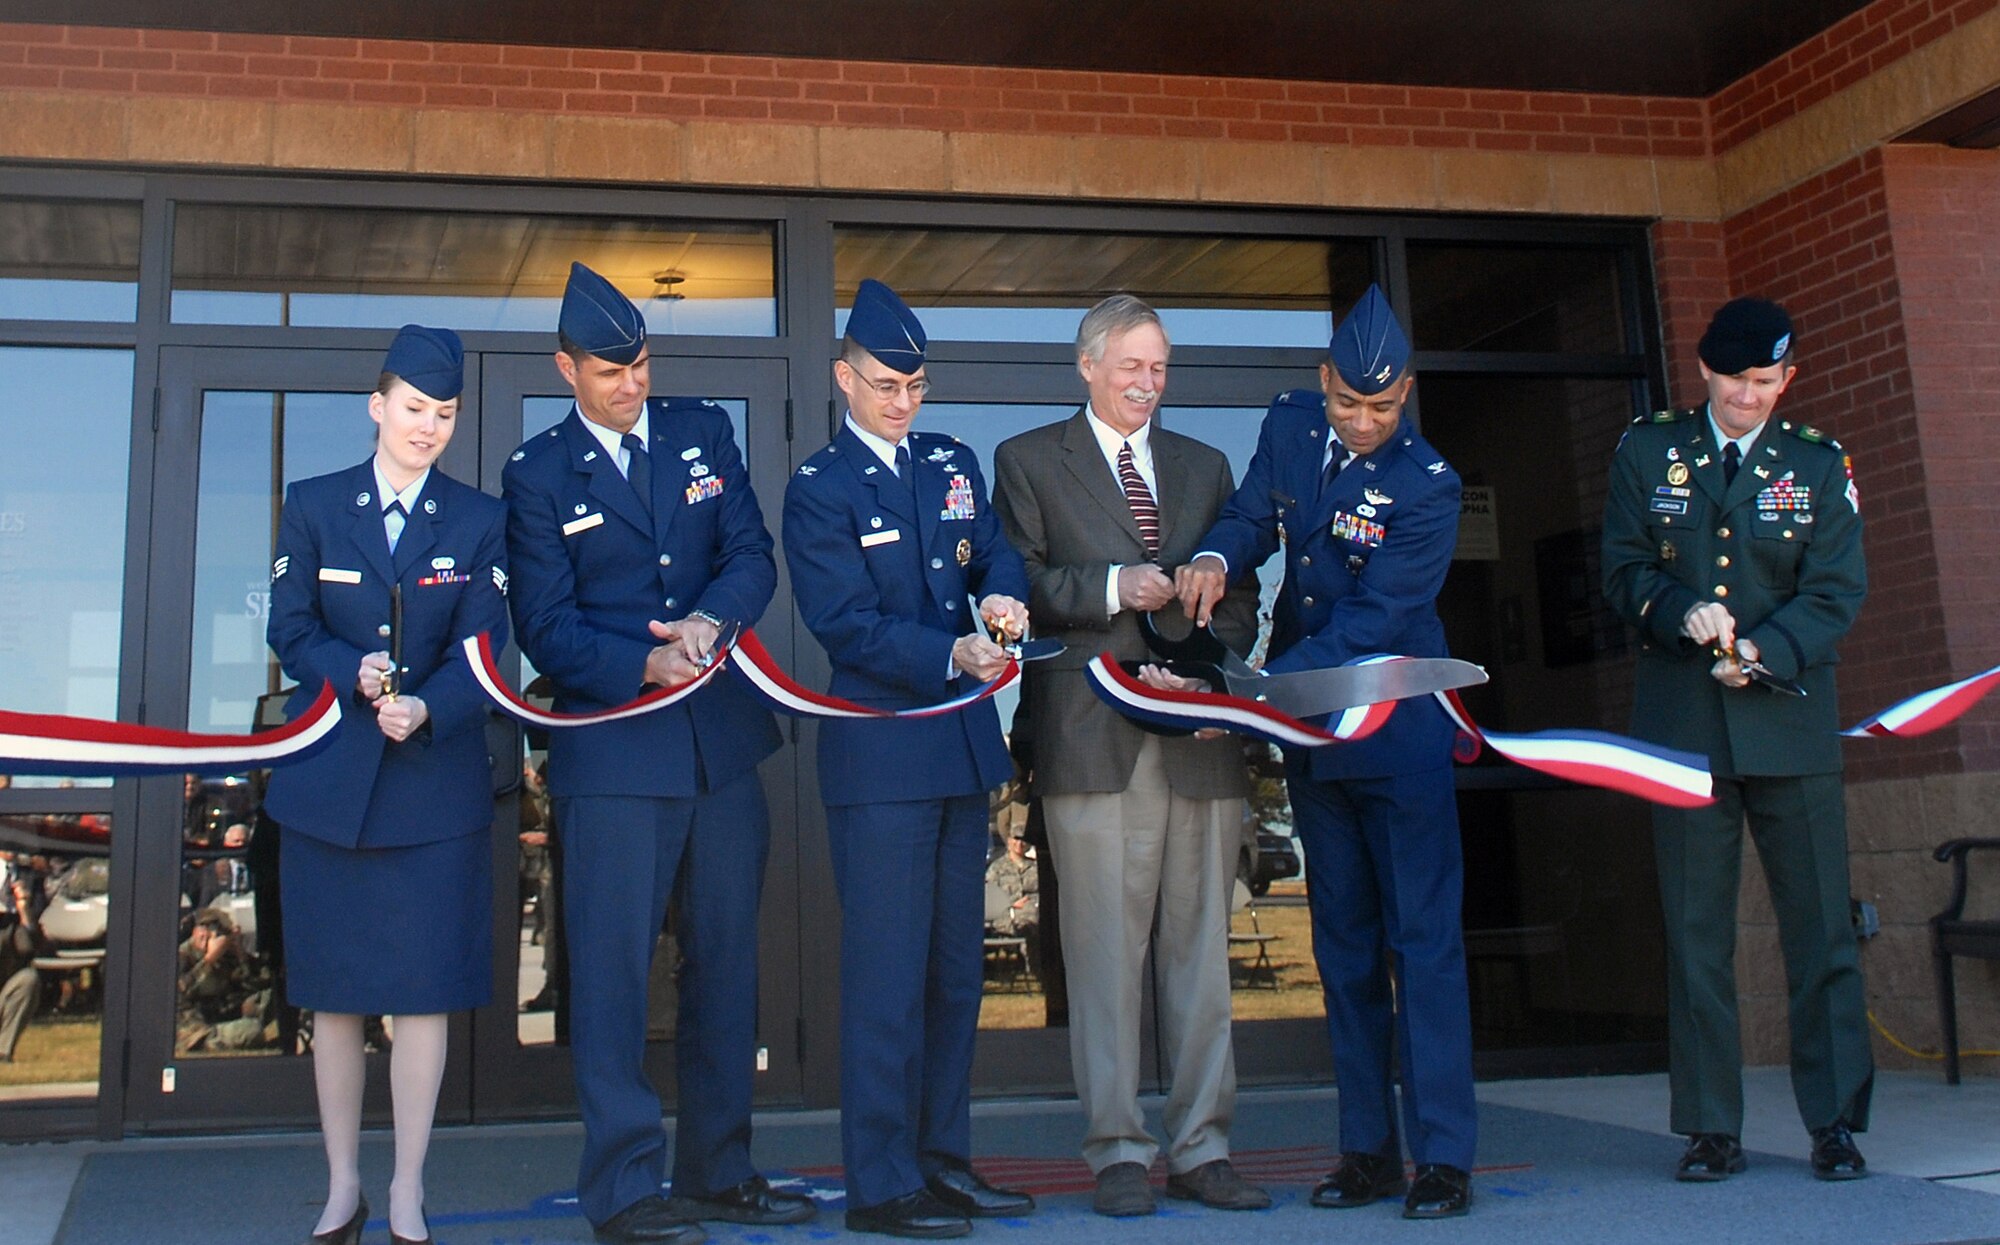 Senior Airman Theresa Davis, 19th Airlift Wing, acting president for the Airman's council, Lt. Col. Jeffrey Collins, 19th Services Squadron commander, Col. C.K. Hyde, 314th Airlift Wing commadner, Congressman Vic Snyder, Col. James Johnson, vice commander 19th Airlift Wing and U.S. Army Col. Donald Jackson Army Corps of Engineers district engineer and commander cut the ribbon at the Hercules Dining Facility grand opening Nov. 7. (U.S. Air Force photo by Staff Sgt. Chris Willis)